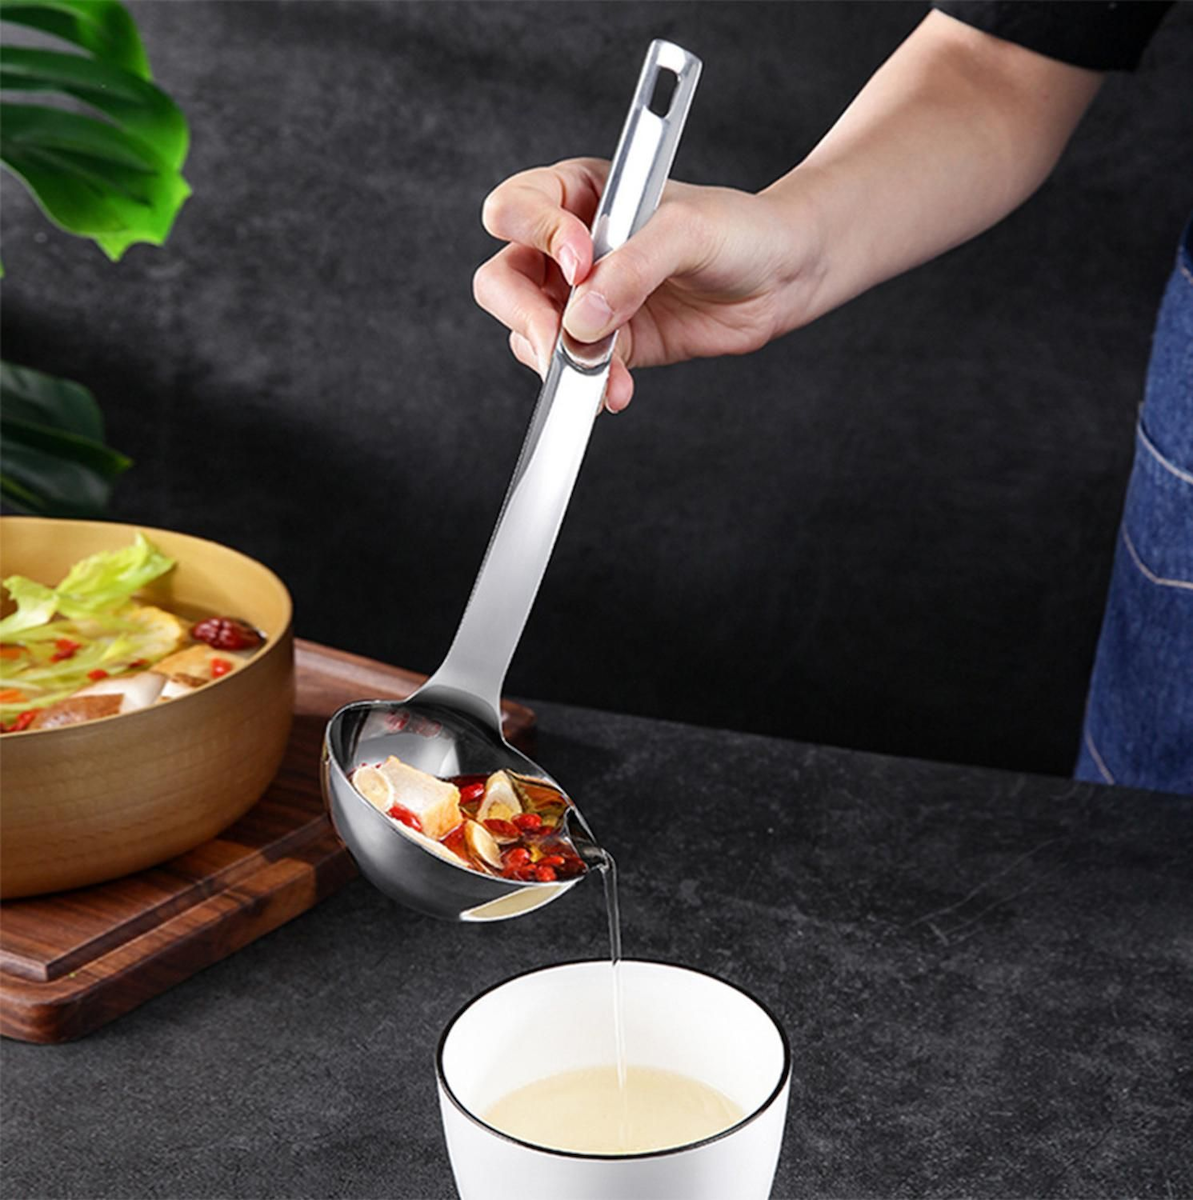 CNY hotpot kitchen gadgets (1) - ladle to remove oil from hotpot soup